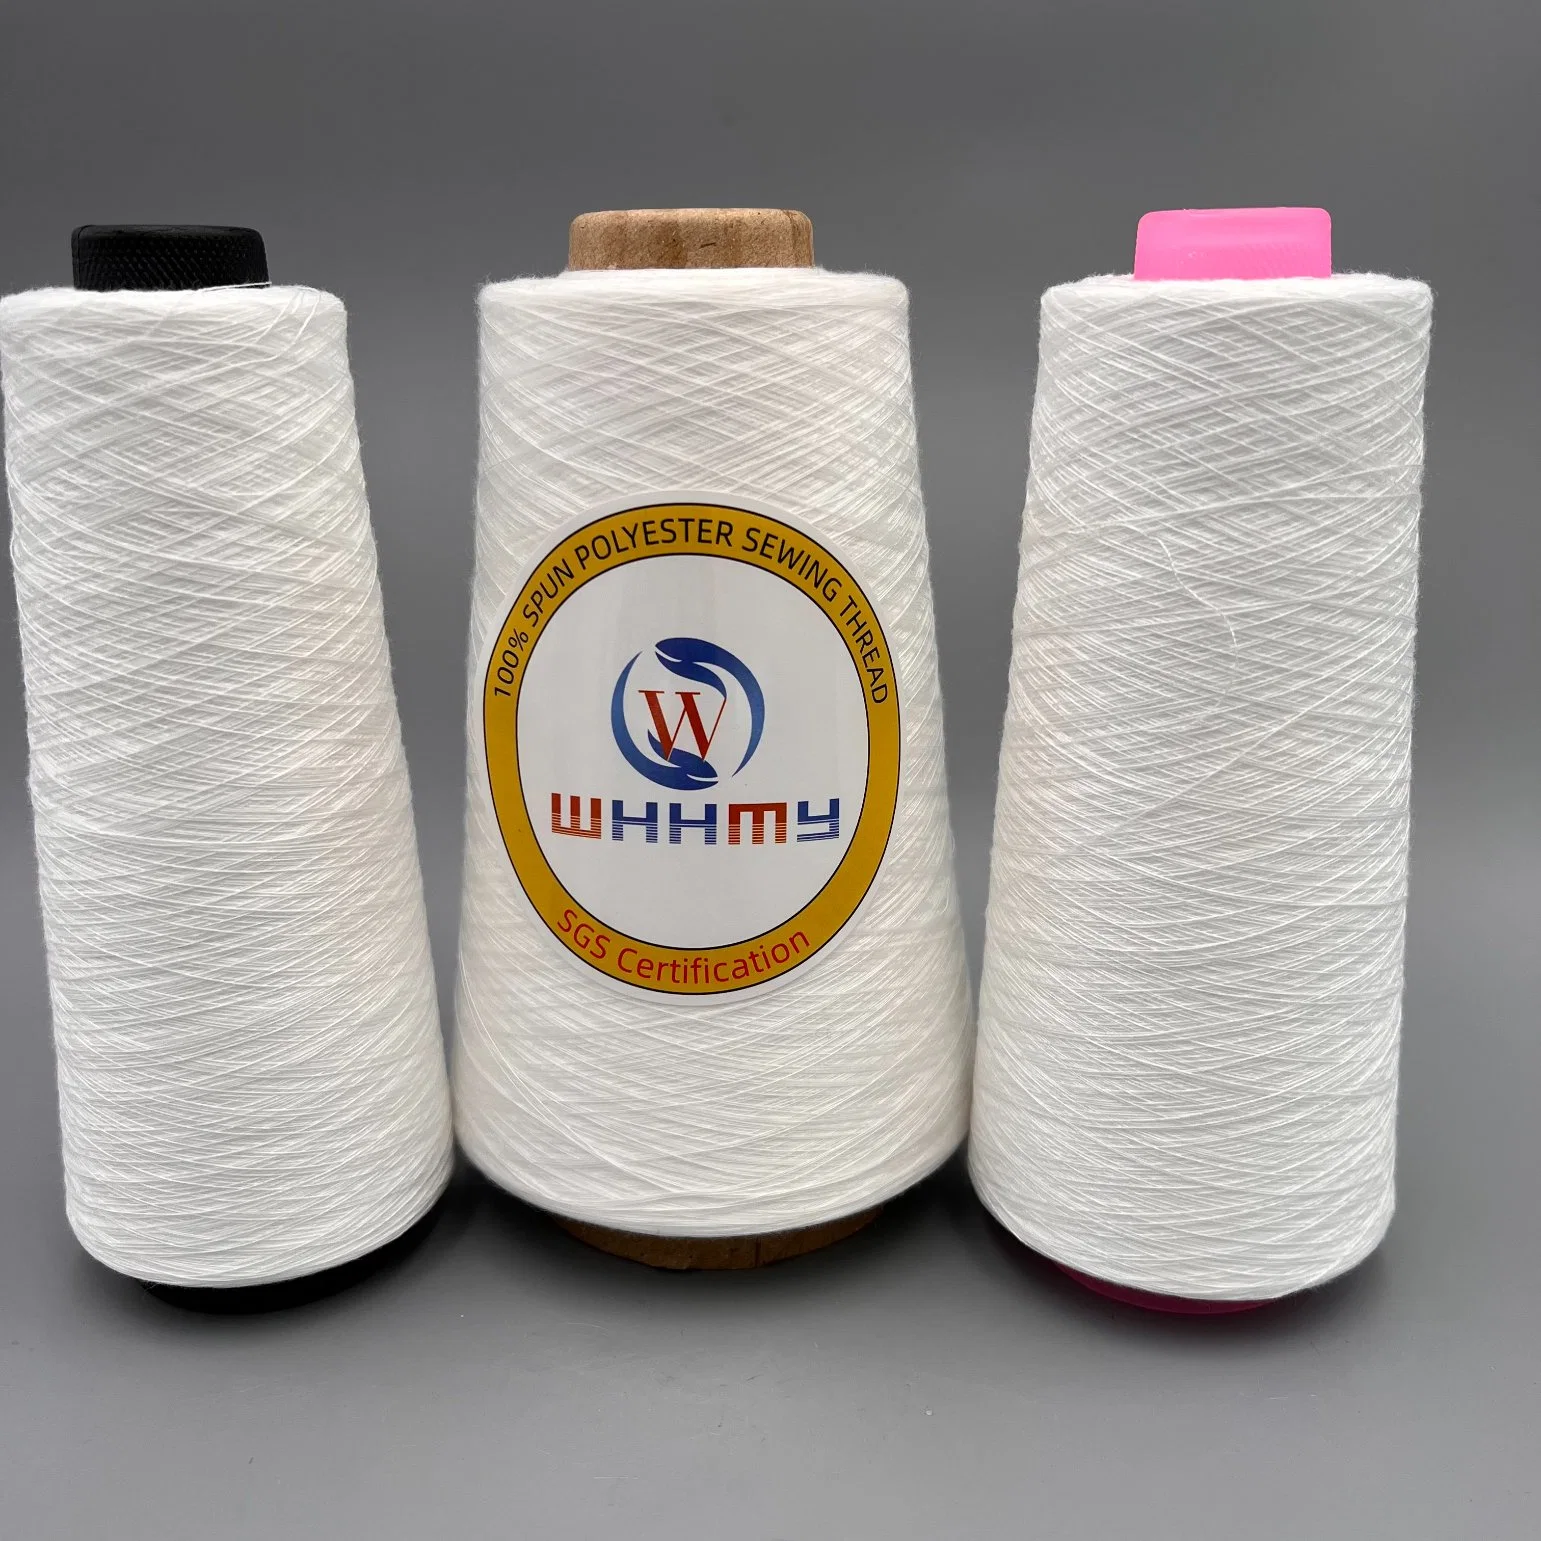 Textile Yarn 100% Spun Bright Virgin Spun Polyester Sewing Thread Paper Cone for Sewing/Weaving/Knitting Factory Directly Sales Exported Standards